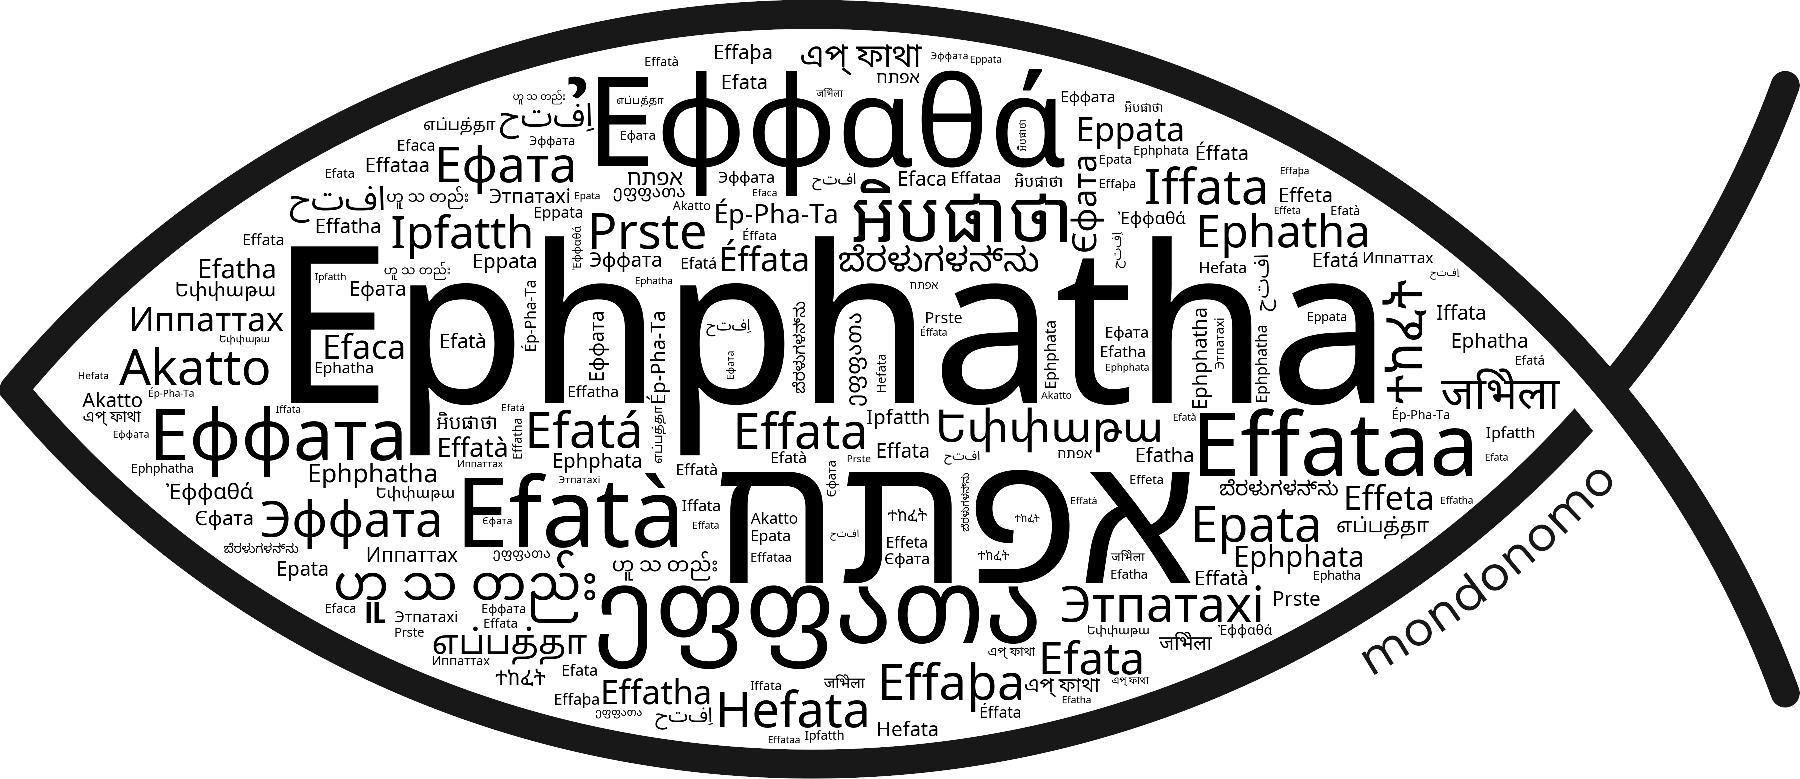 Name Ephphatha in the world's Bibles